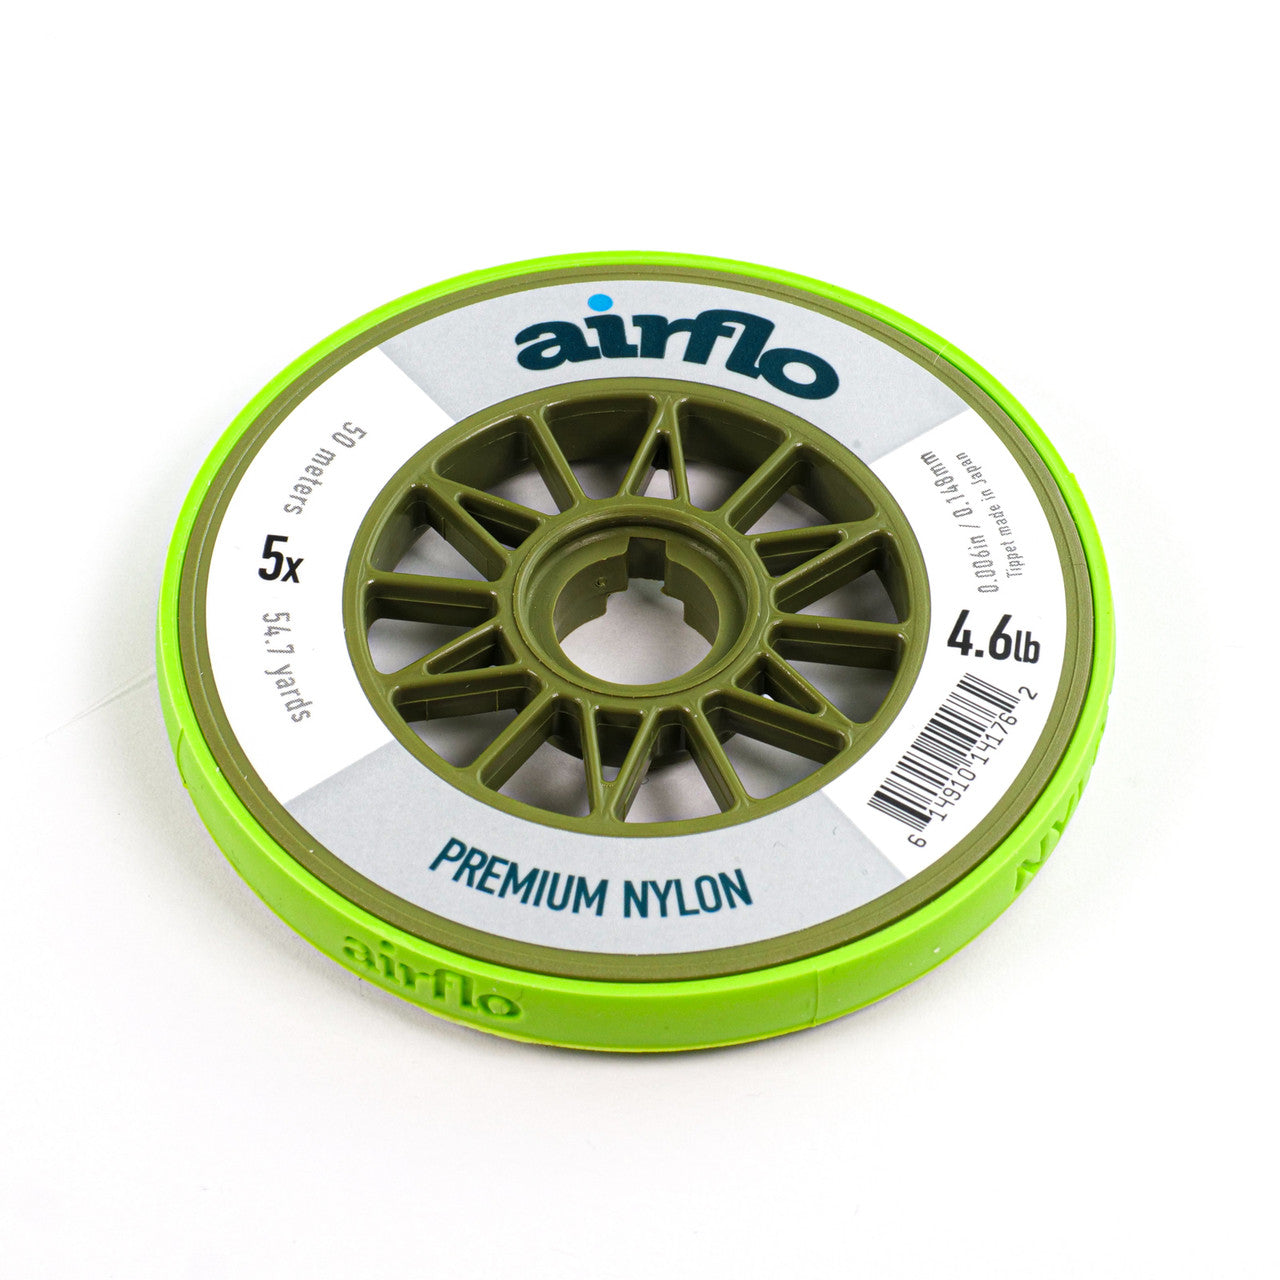 Airflo Premium Nylon Tippet - 50M – Tactical Fly Fisher